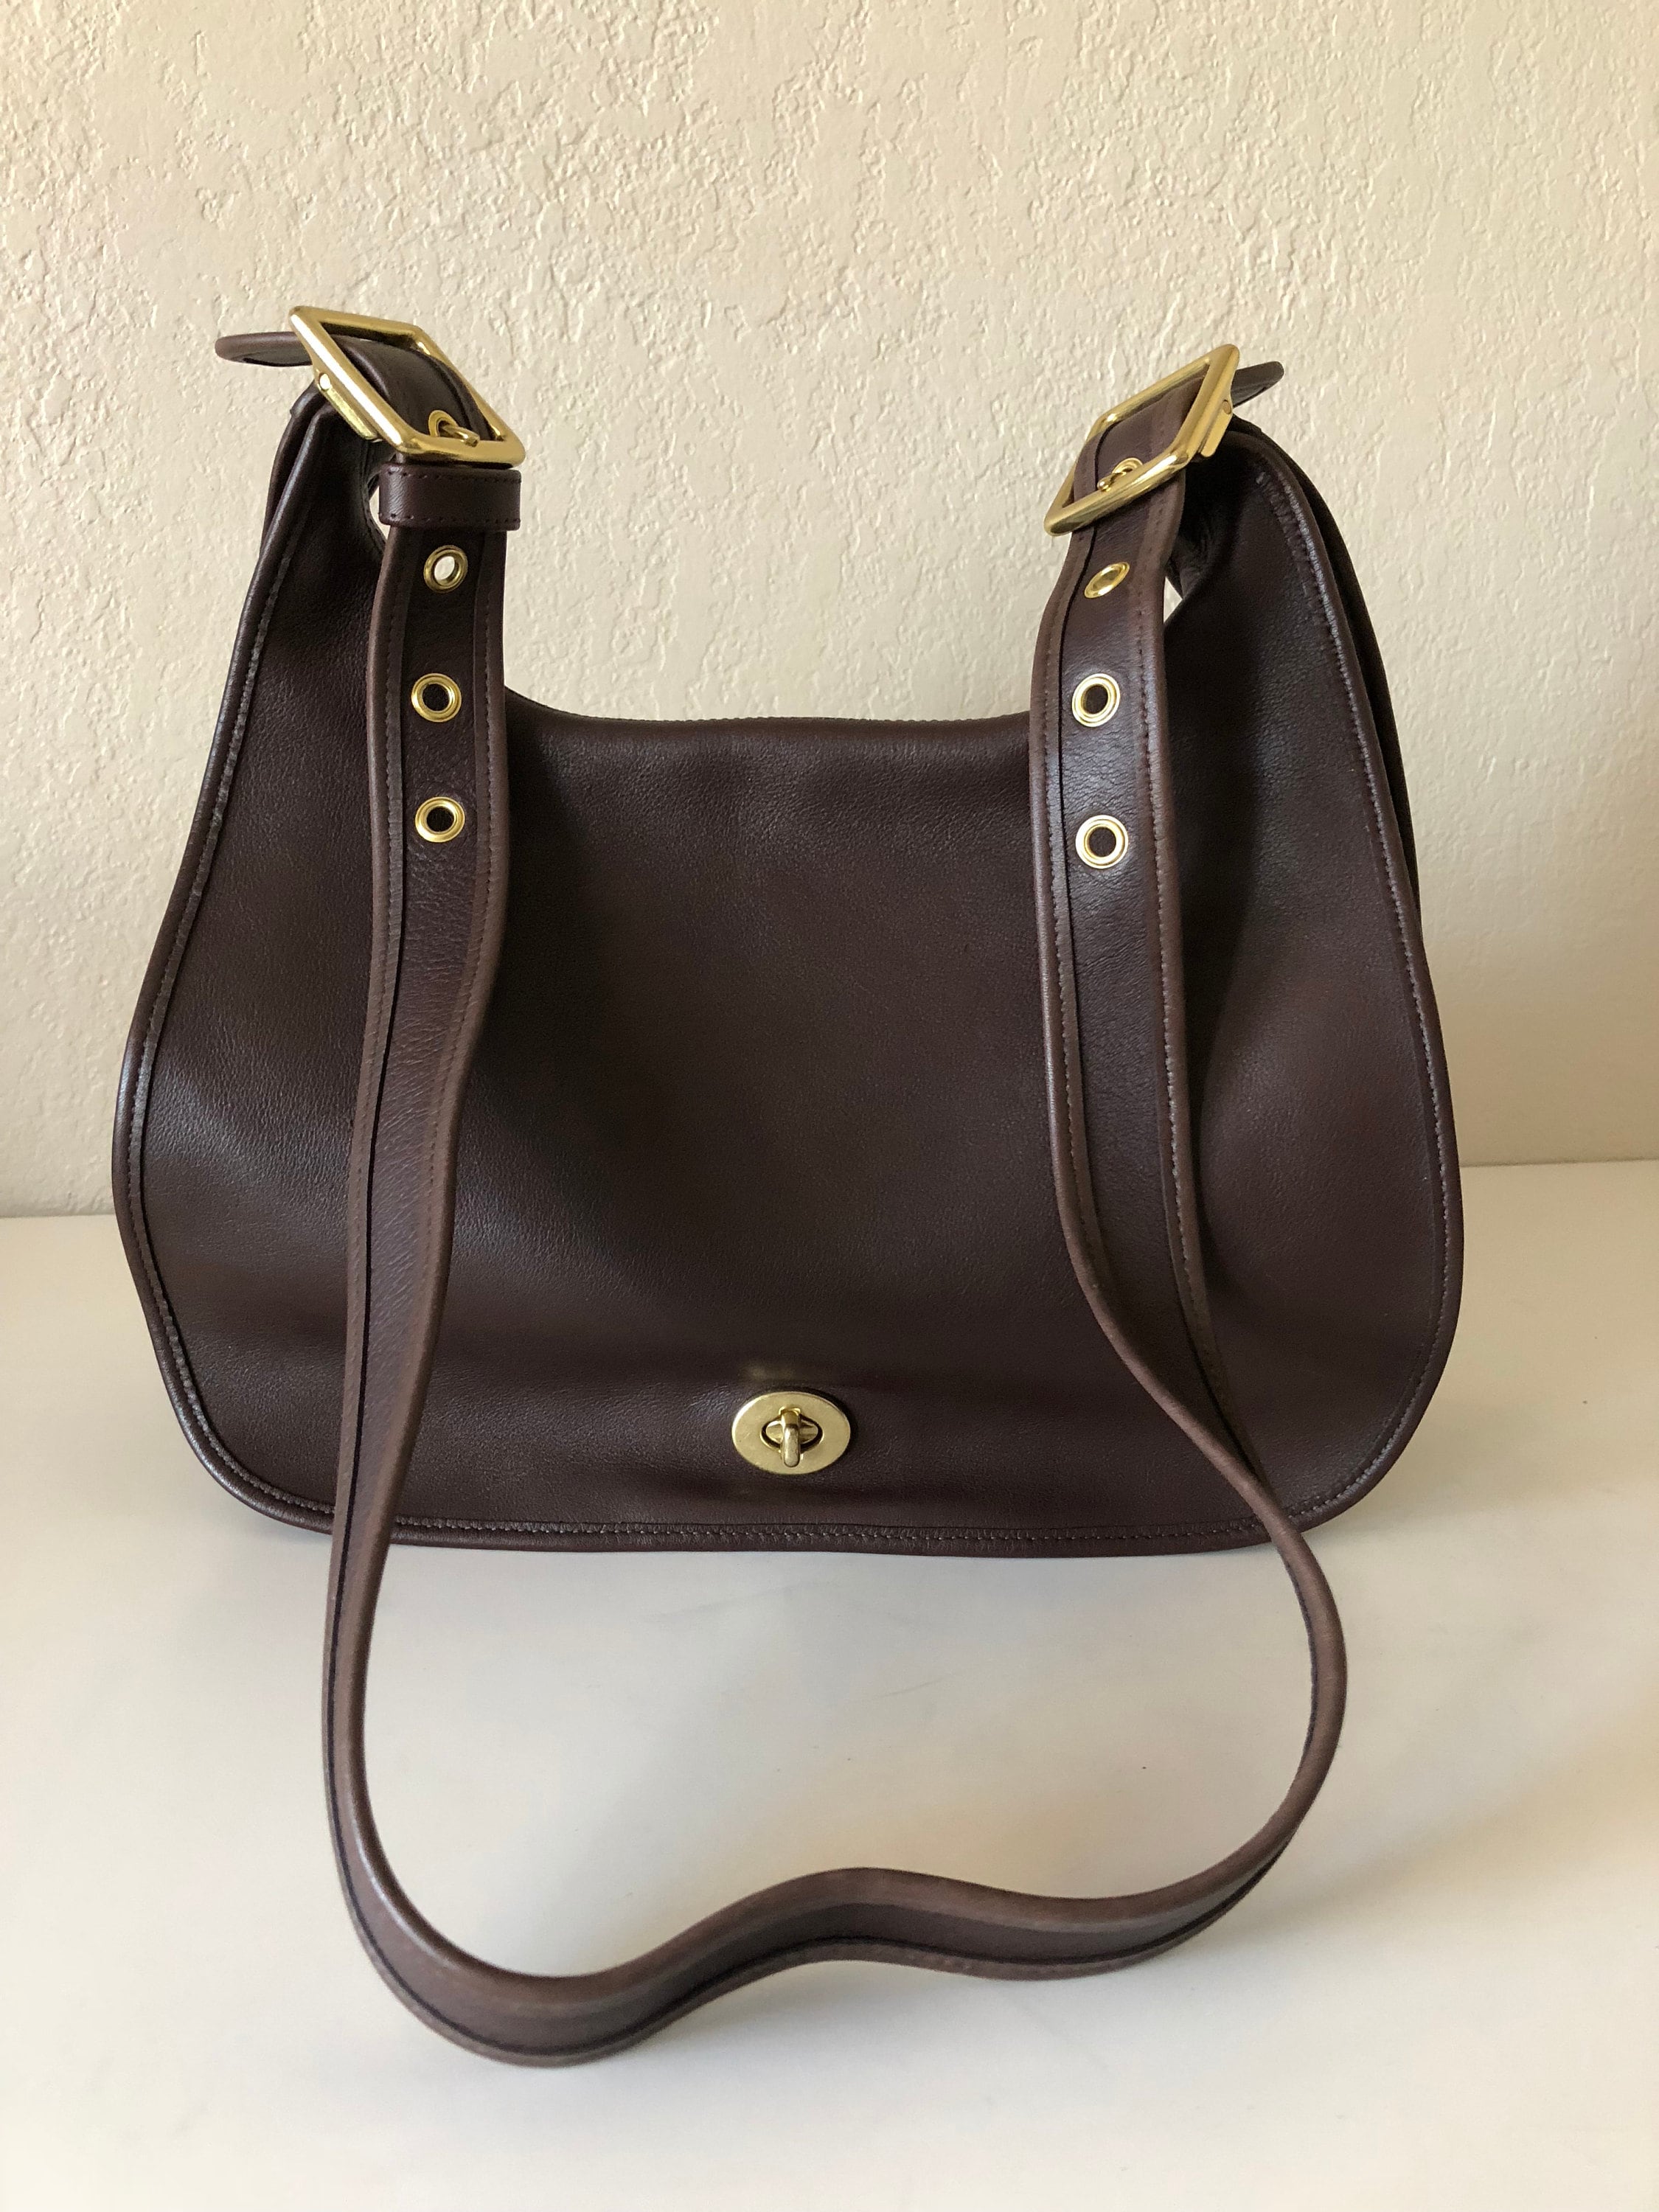 Does anyone know how to restore a vintage Coach bag? : r/Leather